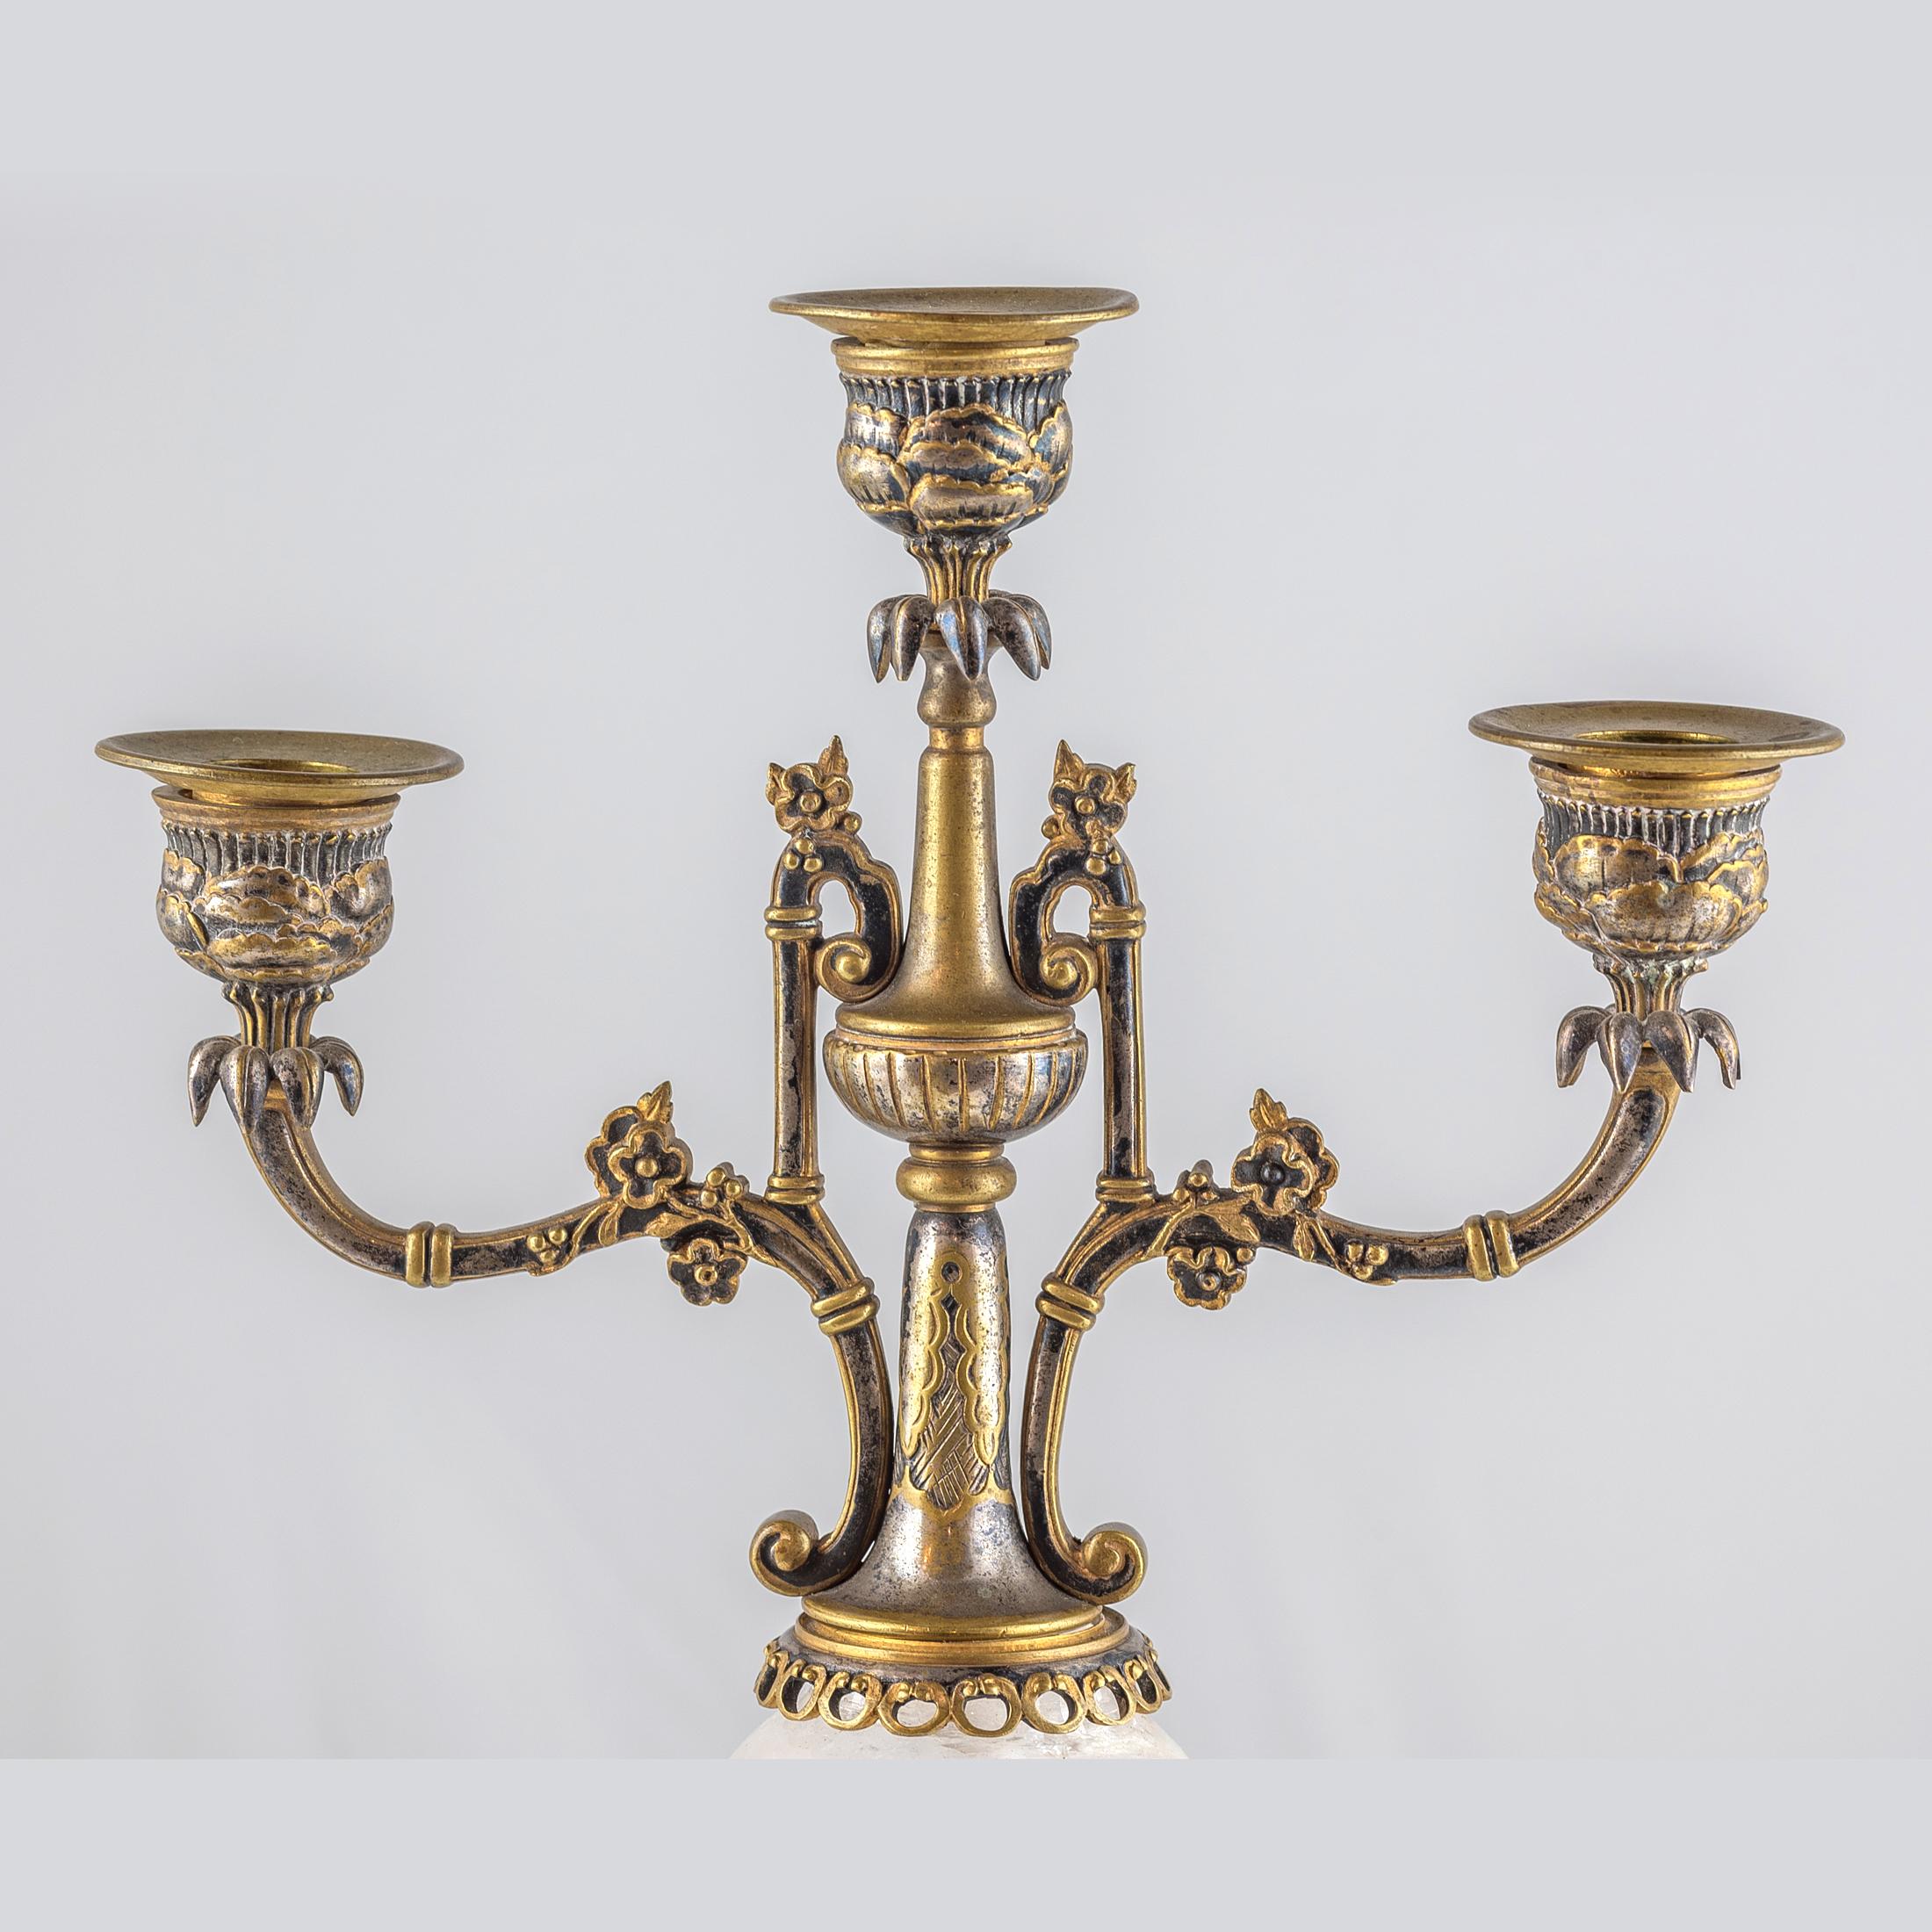 A charming pair of silvered and gilt bronze rock crystal three-light candelabra in chinoiserie motif

Origin: French
Date: 19th Century
Dimension: 16 1/2 inches high.